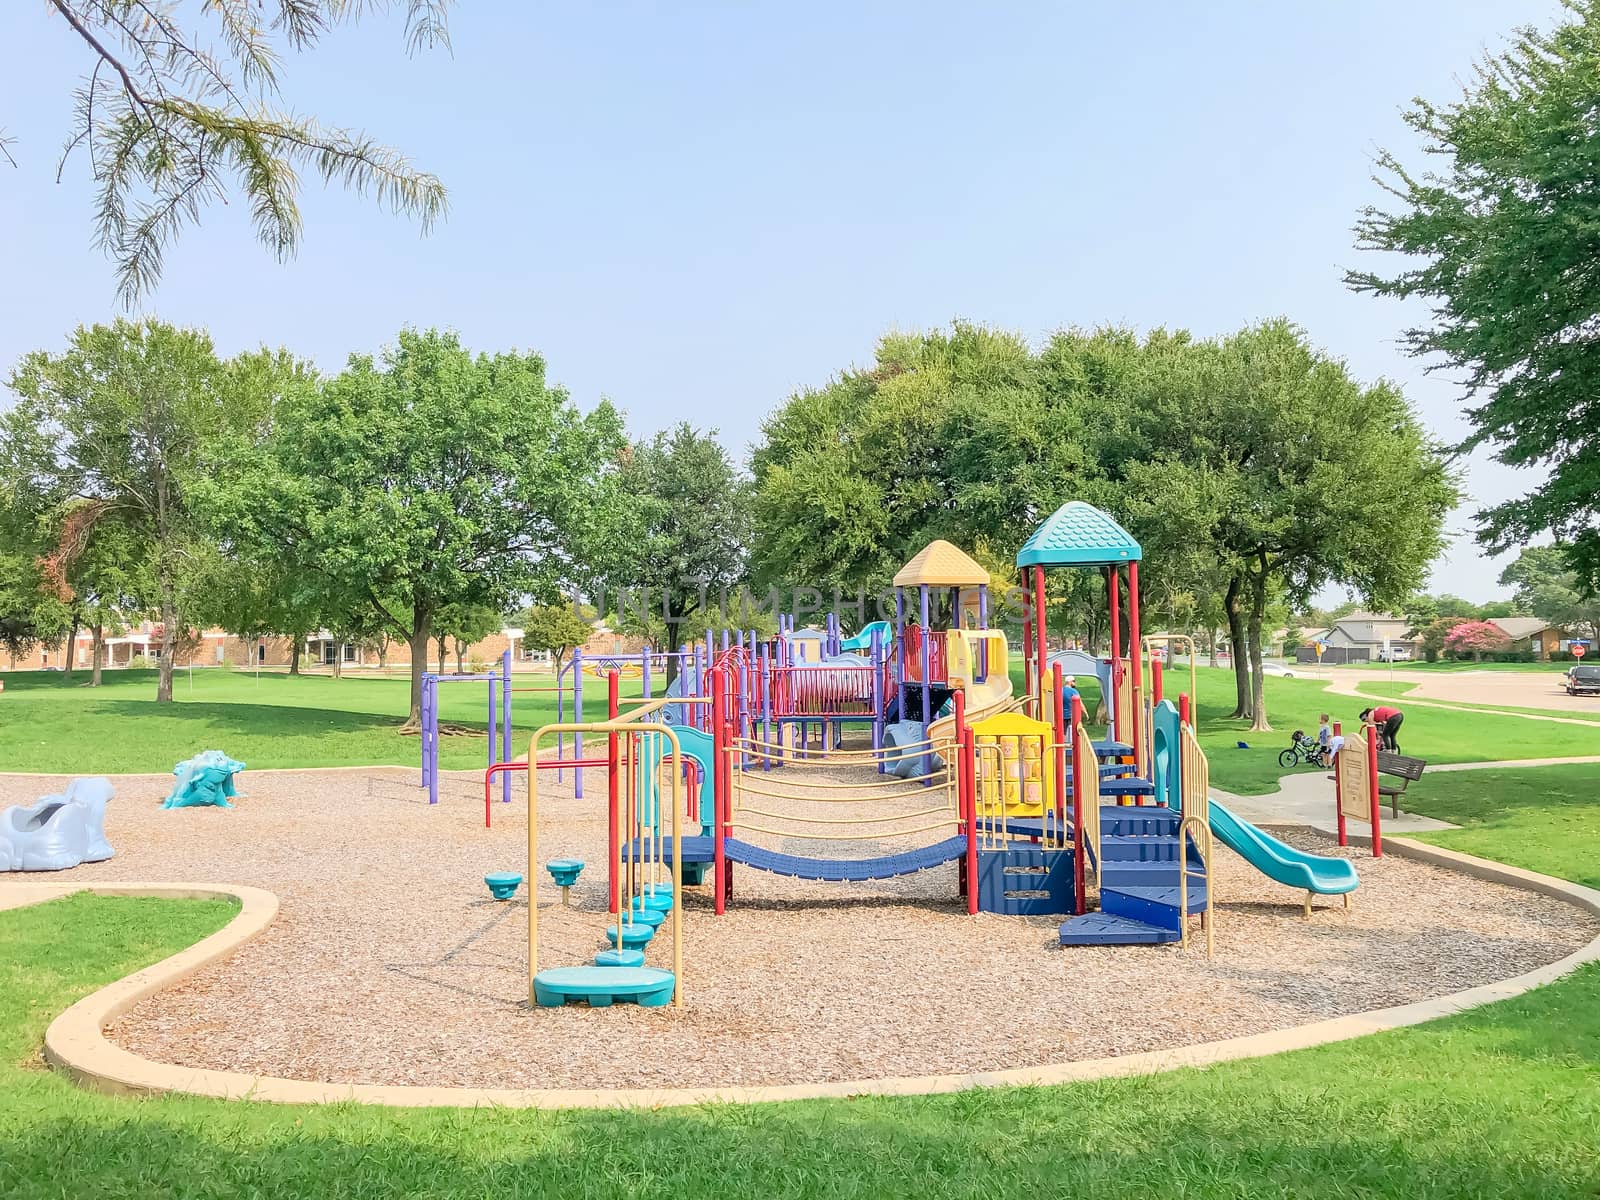 Colorful playground near residential neighborhood in Richardson, Texas, America. Community facility surrounded by large oak trees and green grass lawn